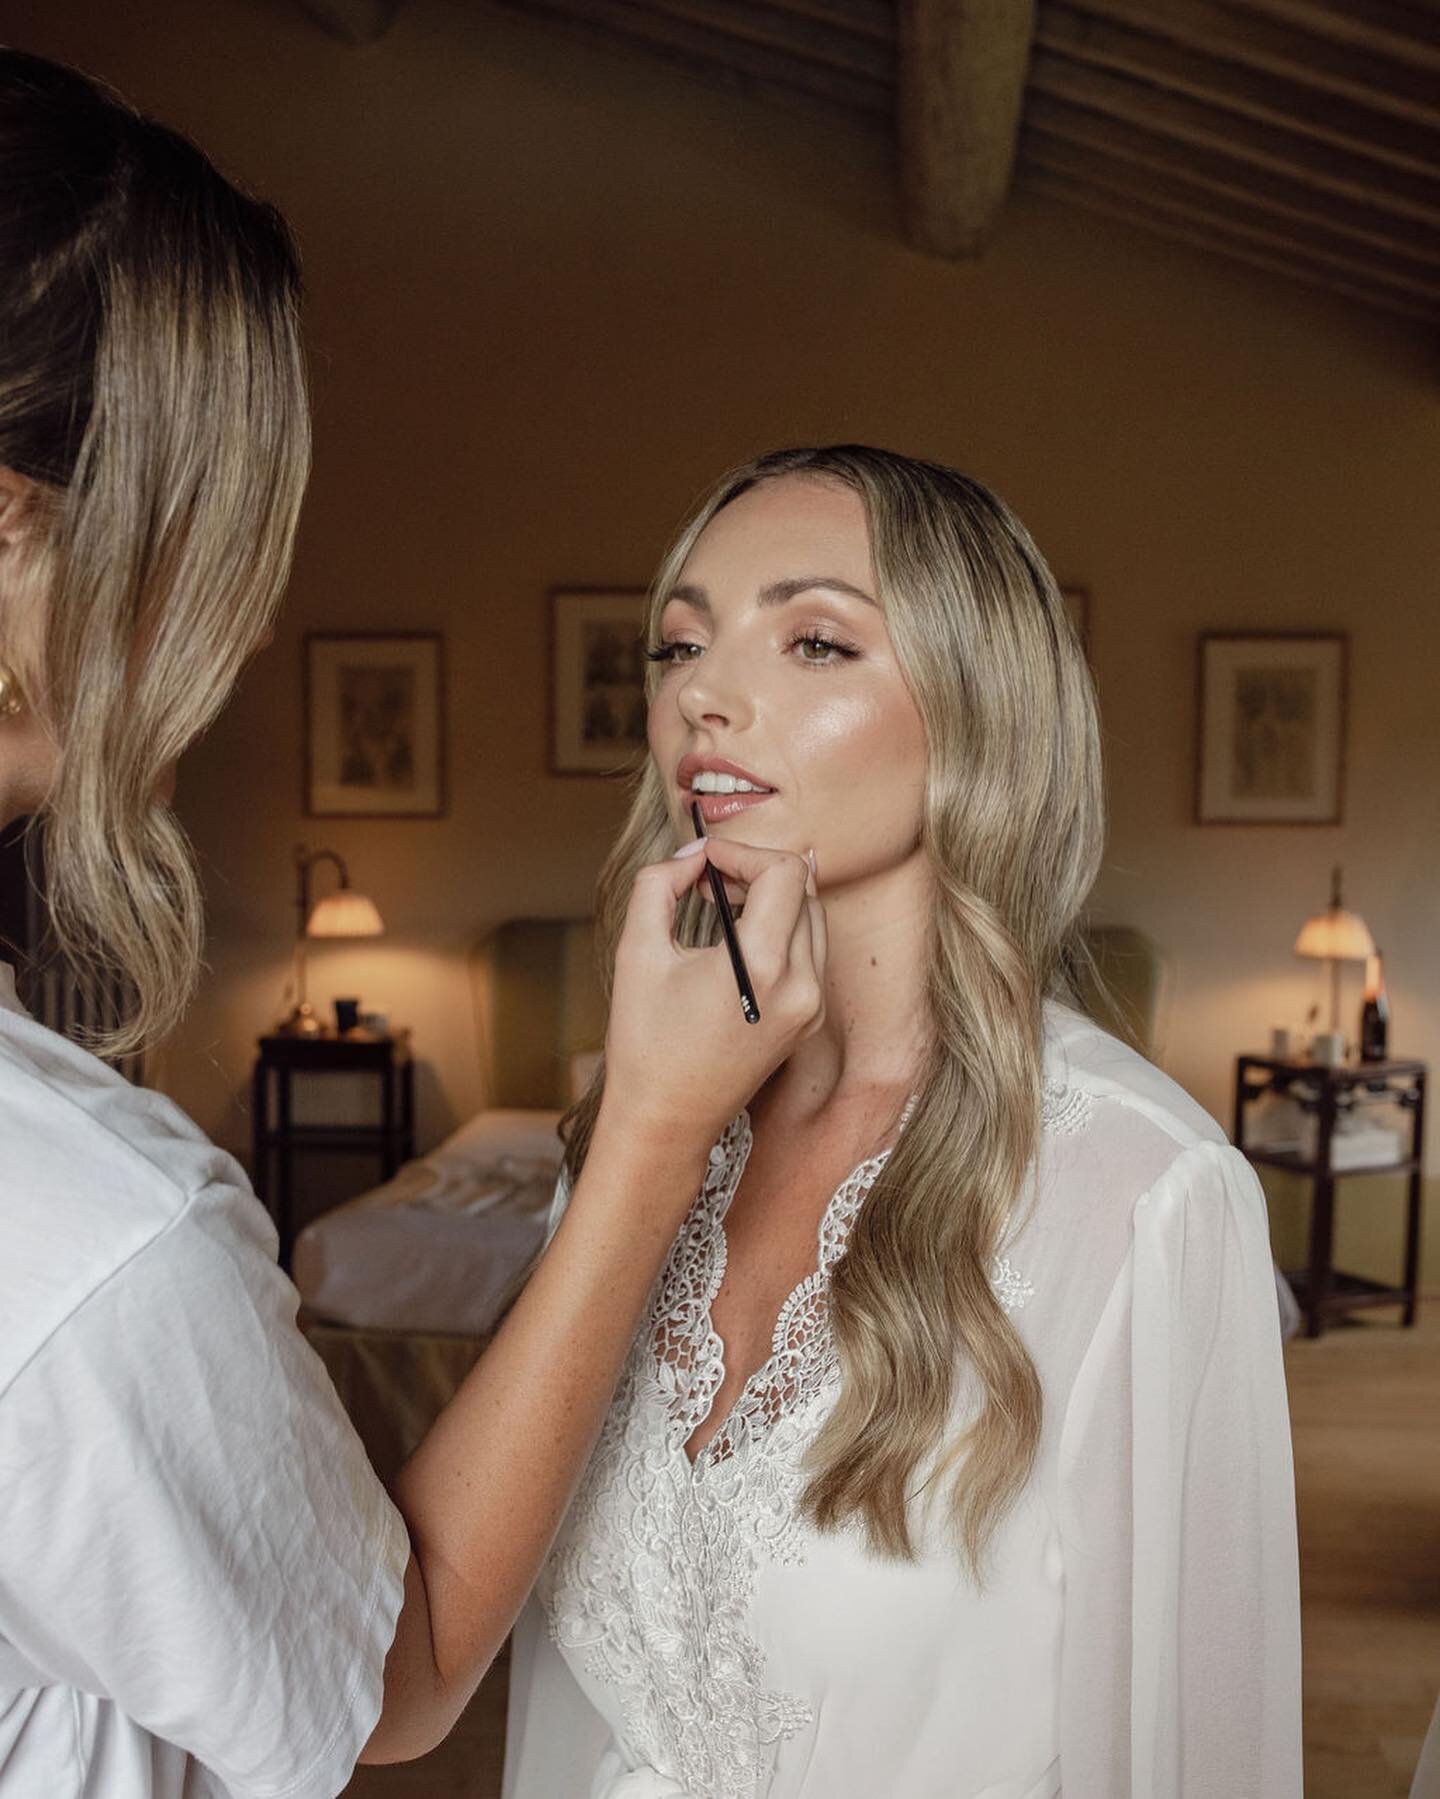 Real bride - Anni 🤍 a very special wedding makeup and hair for Anni and her bridal party in Tuscany, Italy last week. 

This was the most magical day. Annalise&rsquo;s lip colour is all @charlottetilbury pillow talk medium 2 lip cheat liner, the sam